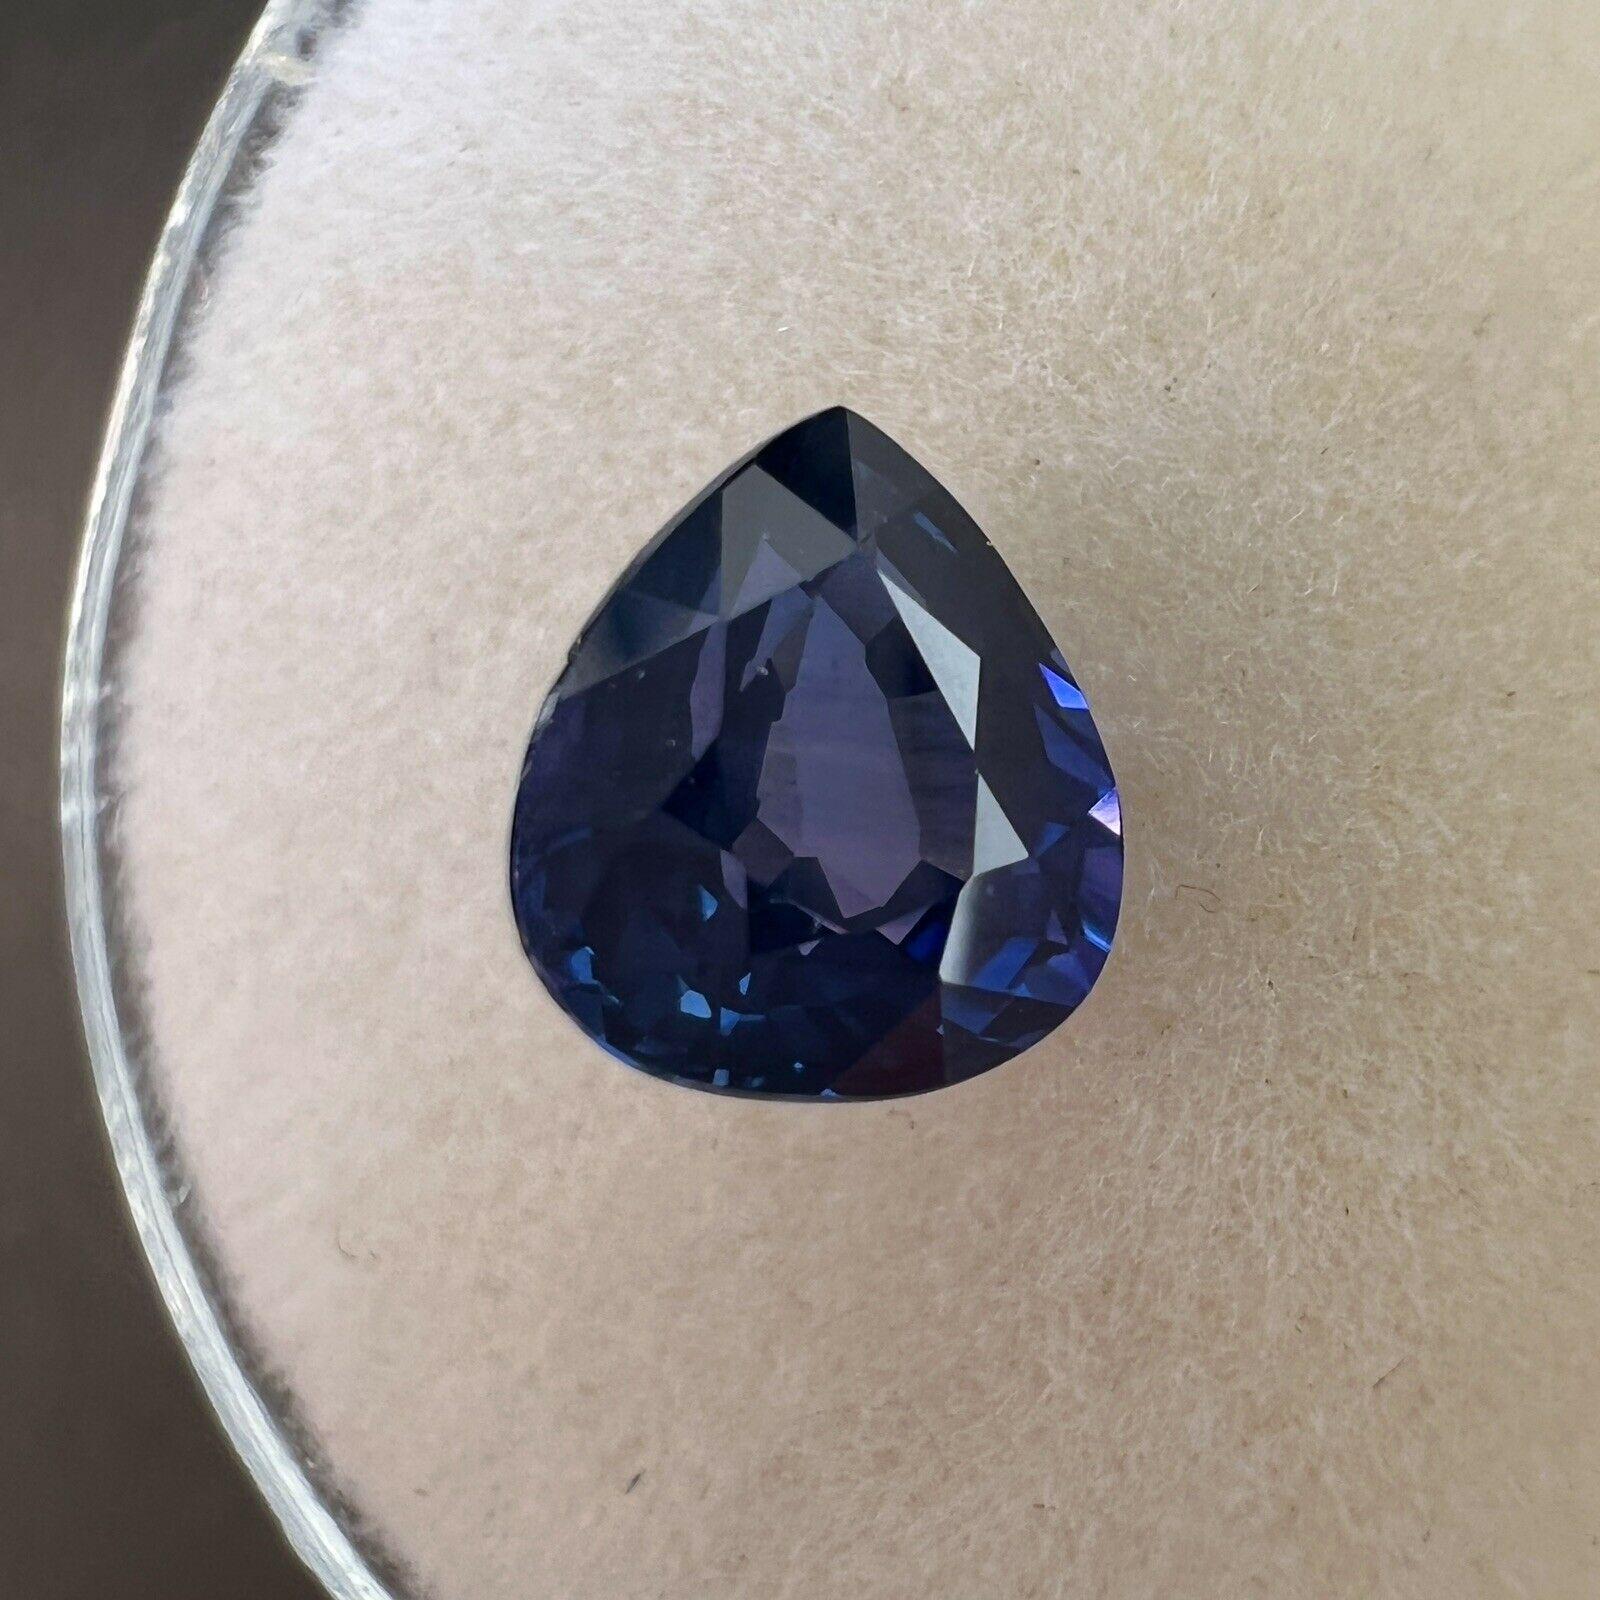 1.22ct Fine Deep Purple Blue Sapphire Pear Cut Rare Loose Cut Gem 6.6x5.8mm

Natural Deep Purple Blue Sapphire Gemstone.
1.22 Carat with a beautiful deep purple blue colour and very good clarity, some small natural inclusions visible when looking